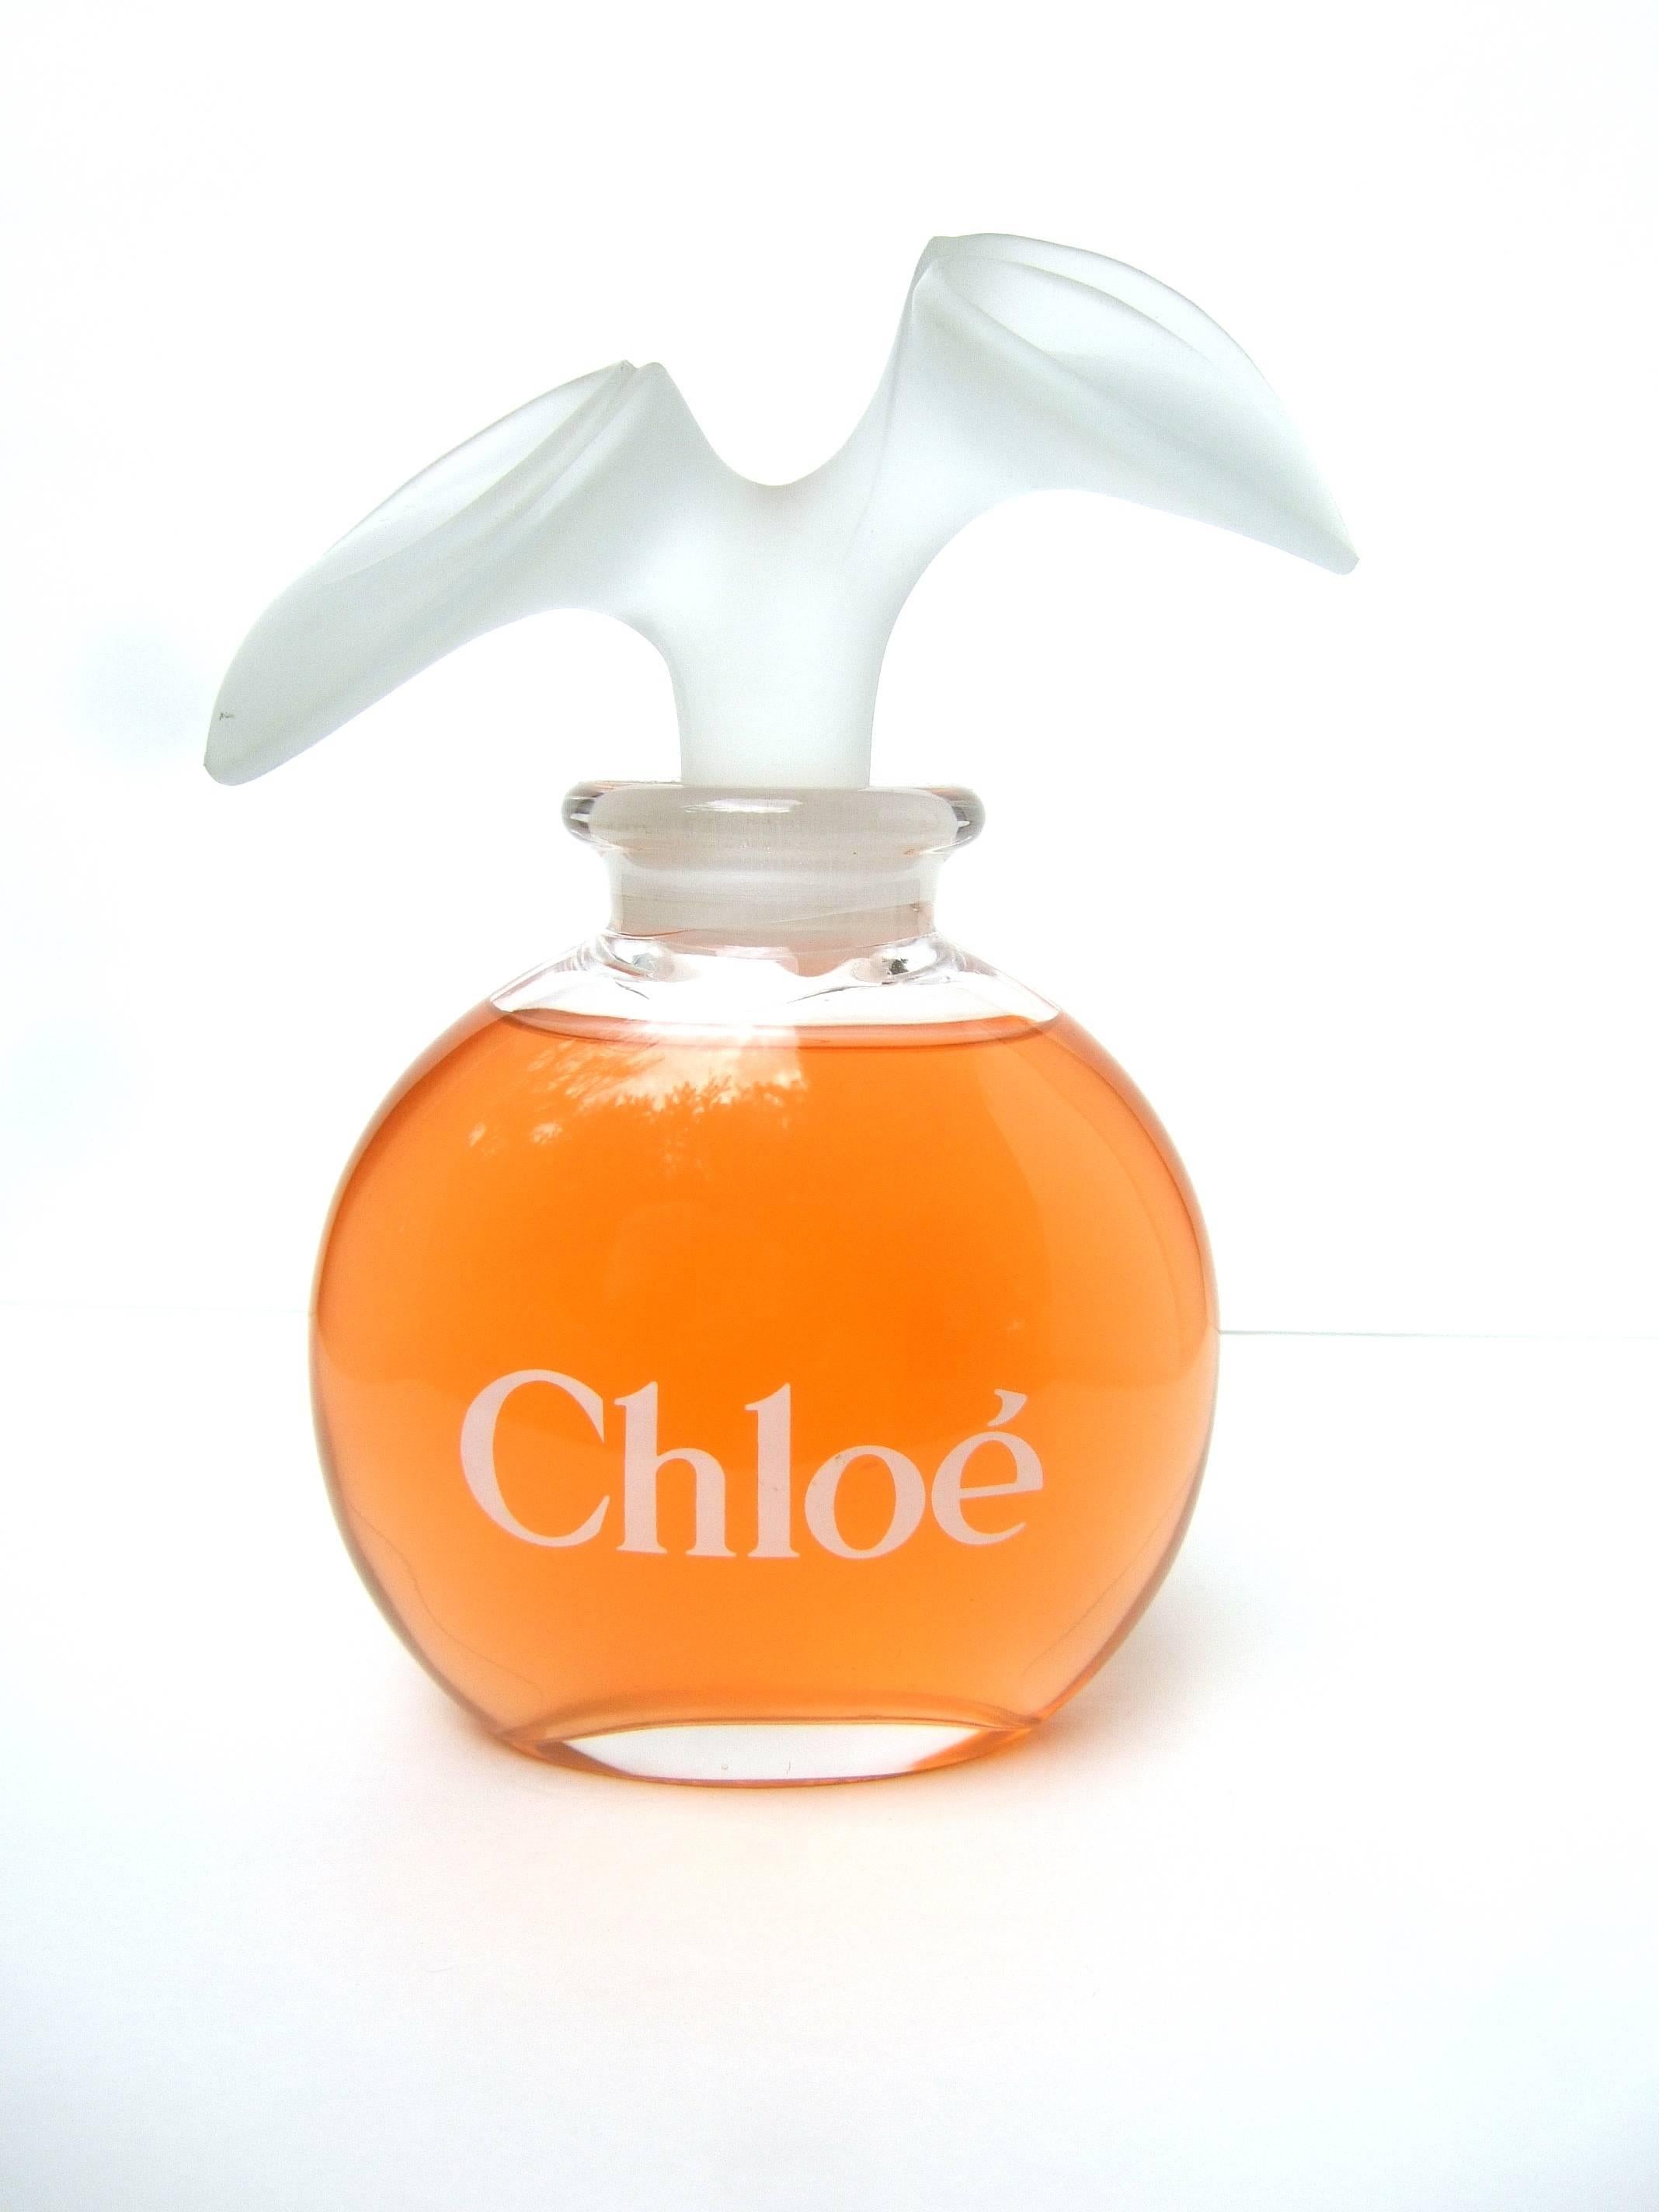 Chloe Large glass factice display bottle c 1980s
The elegant designer glass bottle was a
display bottle at the fragrance counter in a
department store 

The smooth glass oval shaped bottle is juxtaposed 
with a frosted glass large scale